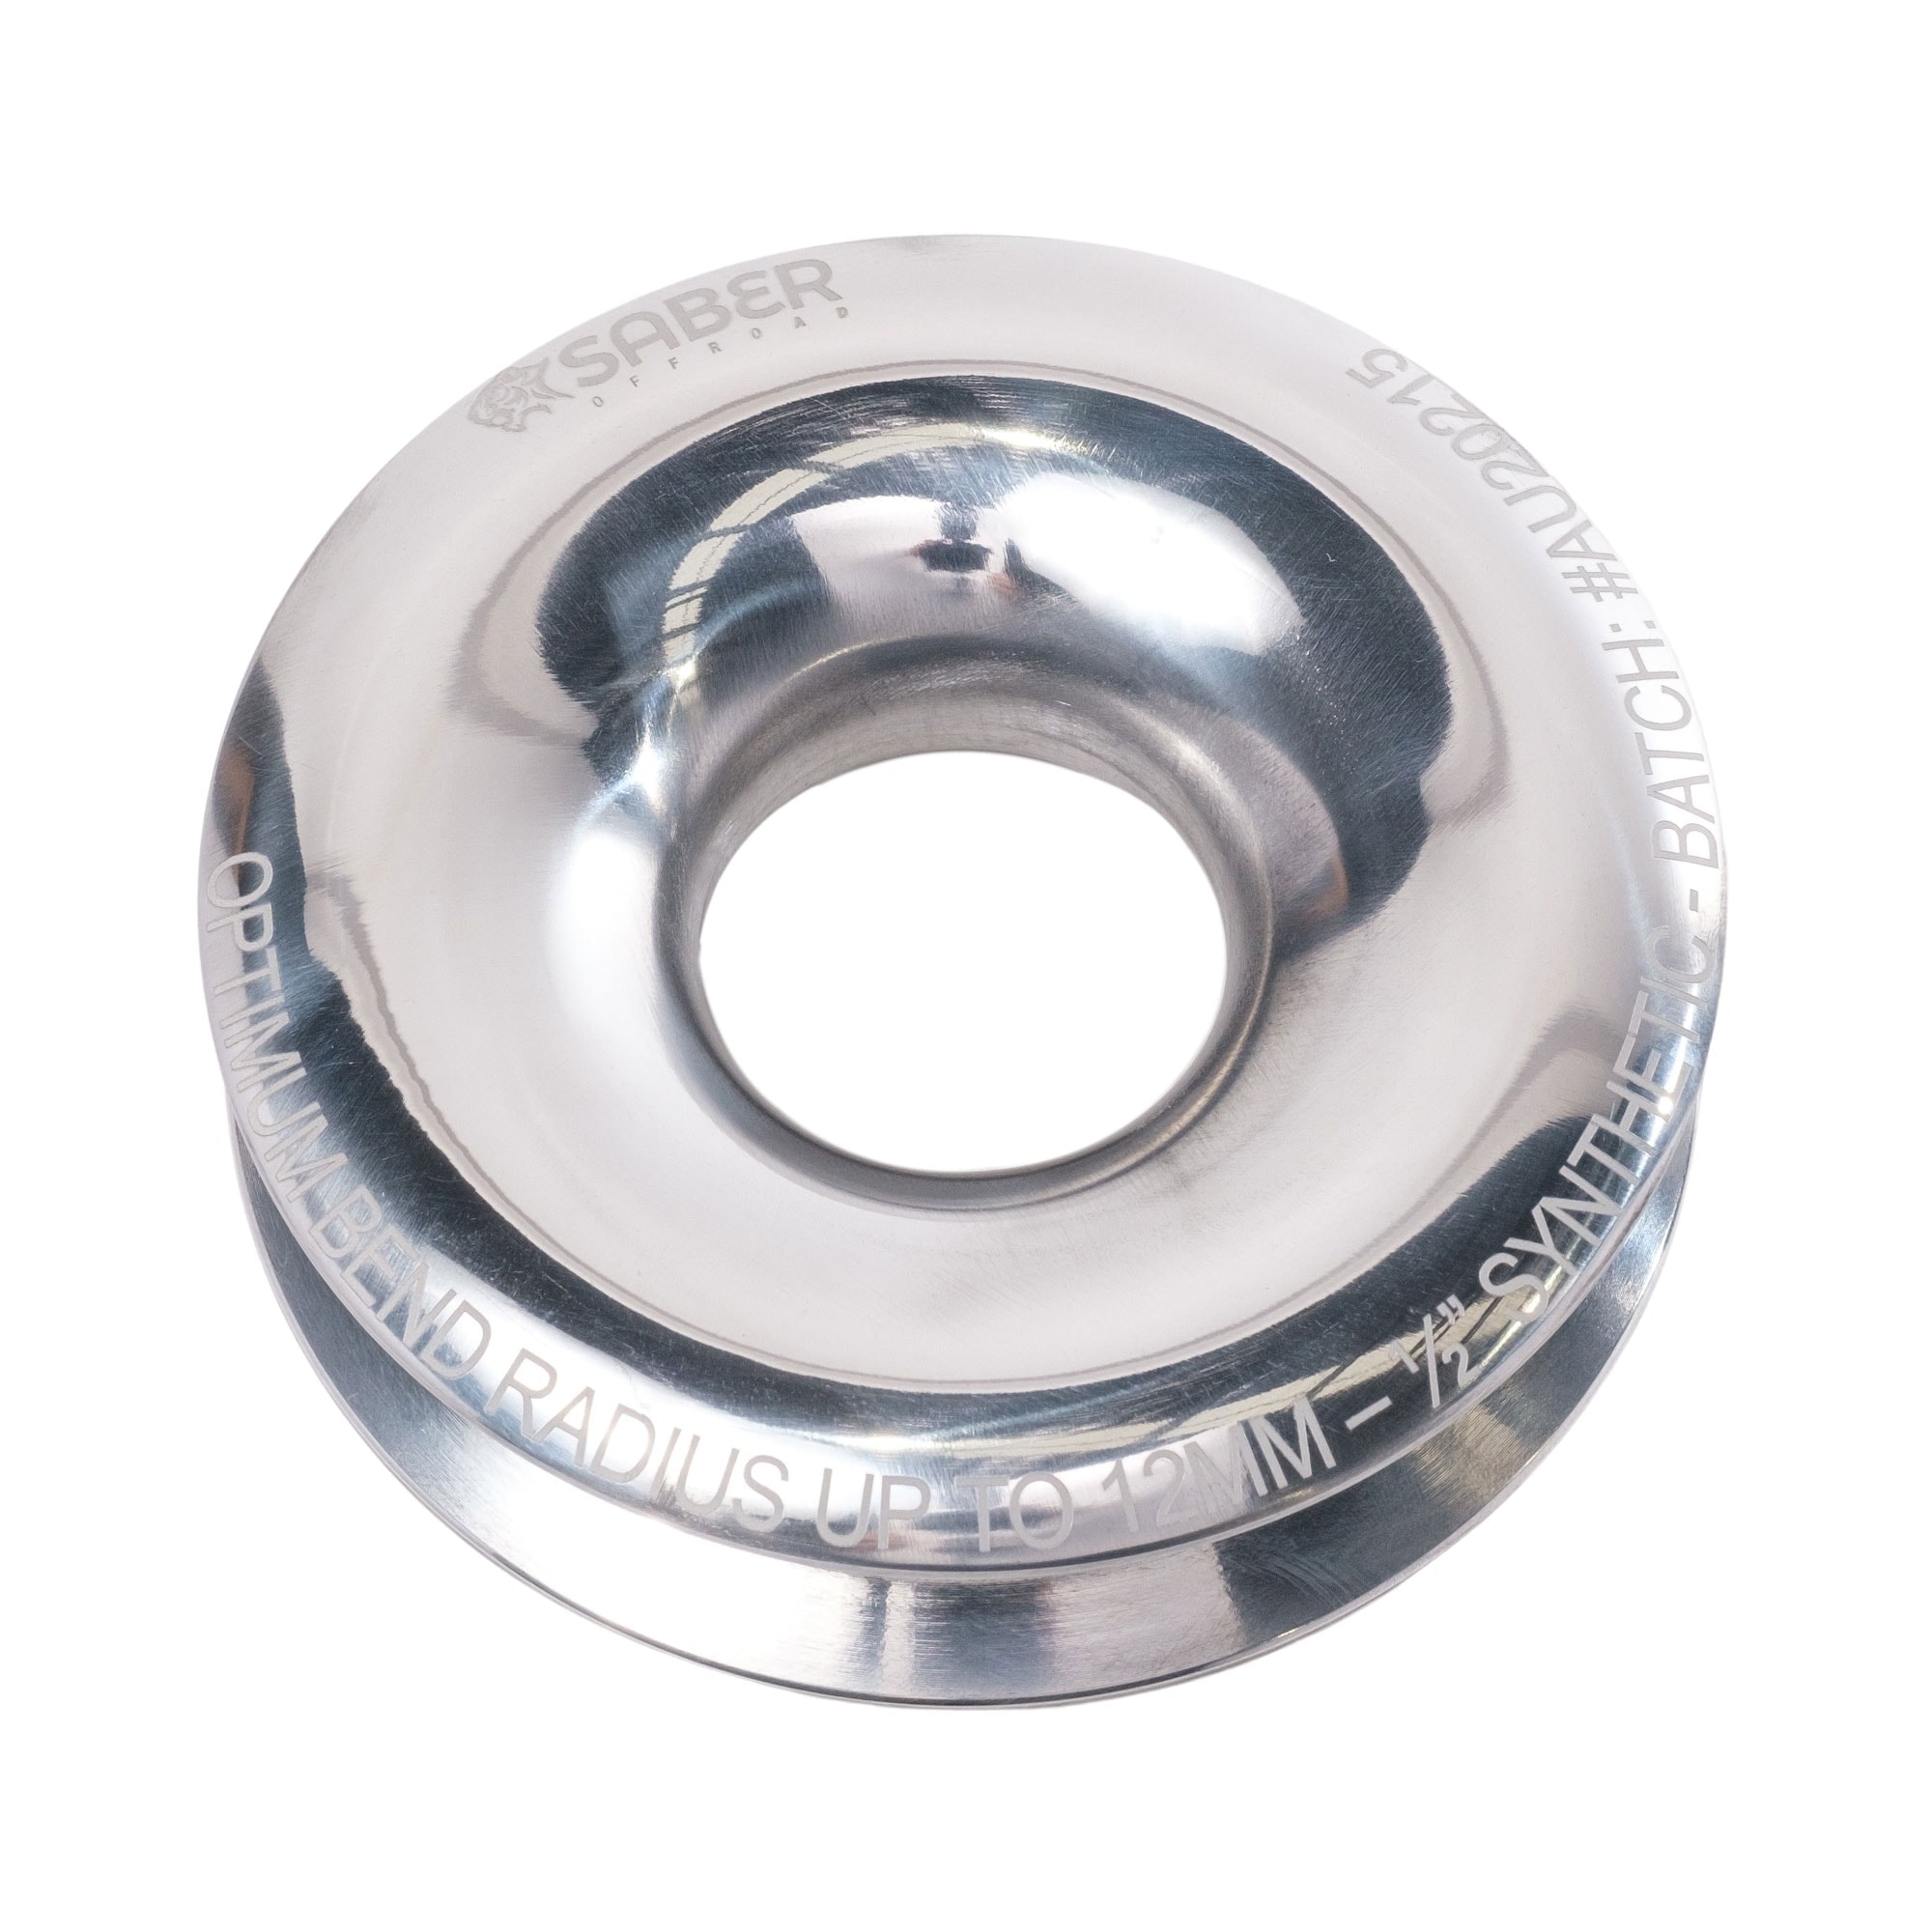 Saber Offroad Recovery Rings 2000px 22749